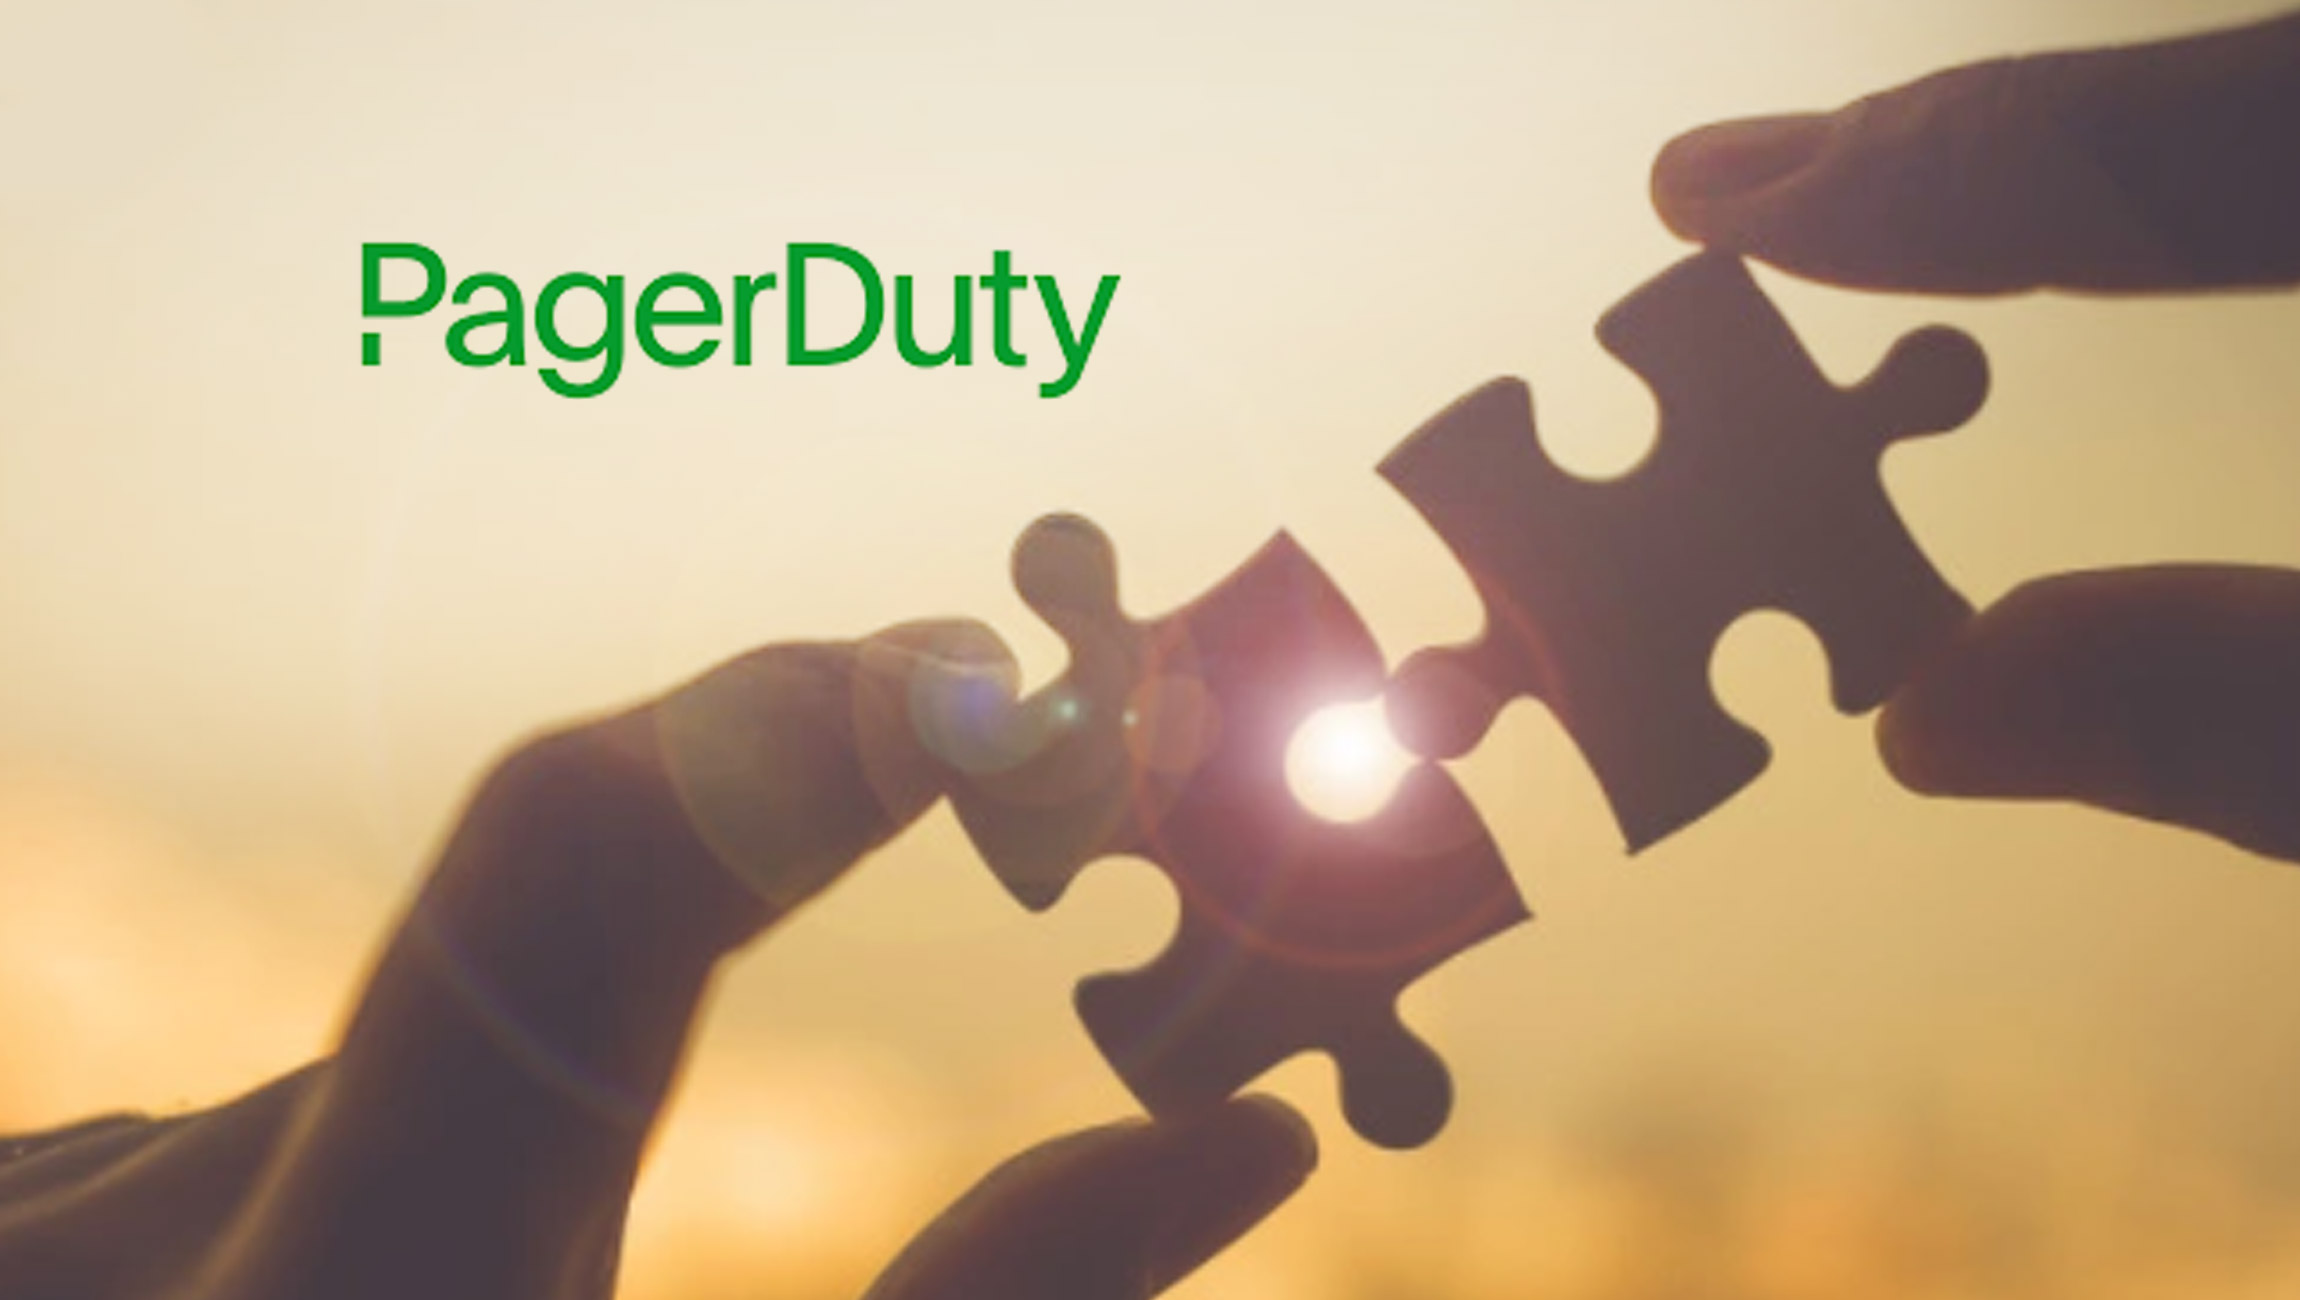 PagerDuty-to-Acquire-Catalytic_-Continue-Transforming-Digital-Operations-with-Industry-Leading-No-Code-Workflow-Automation